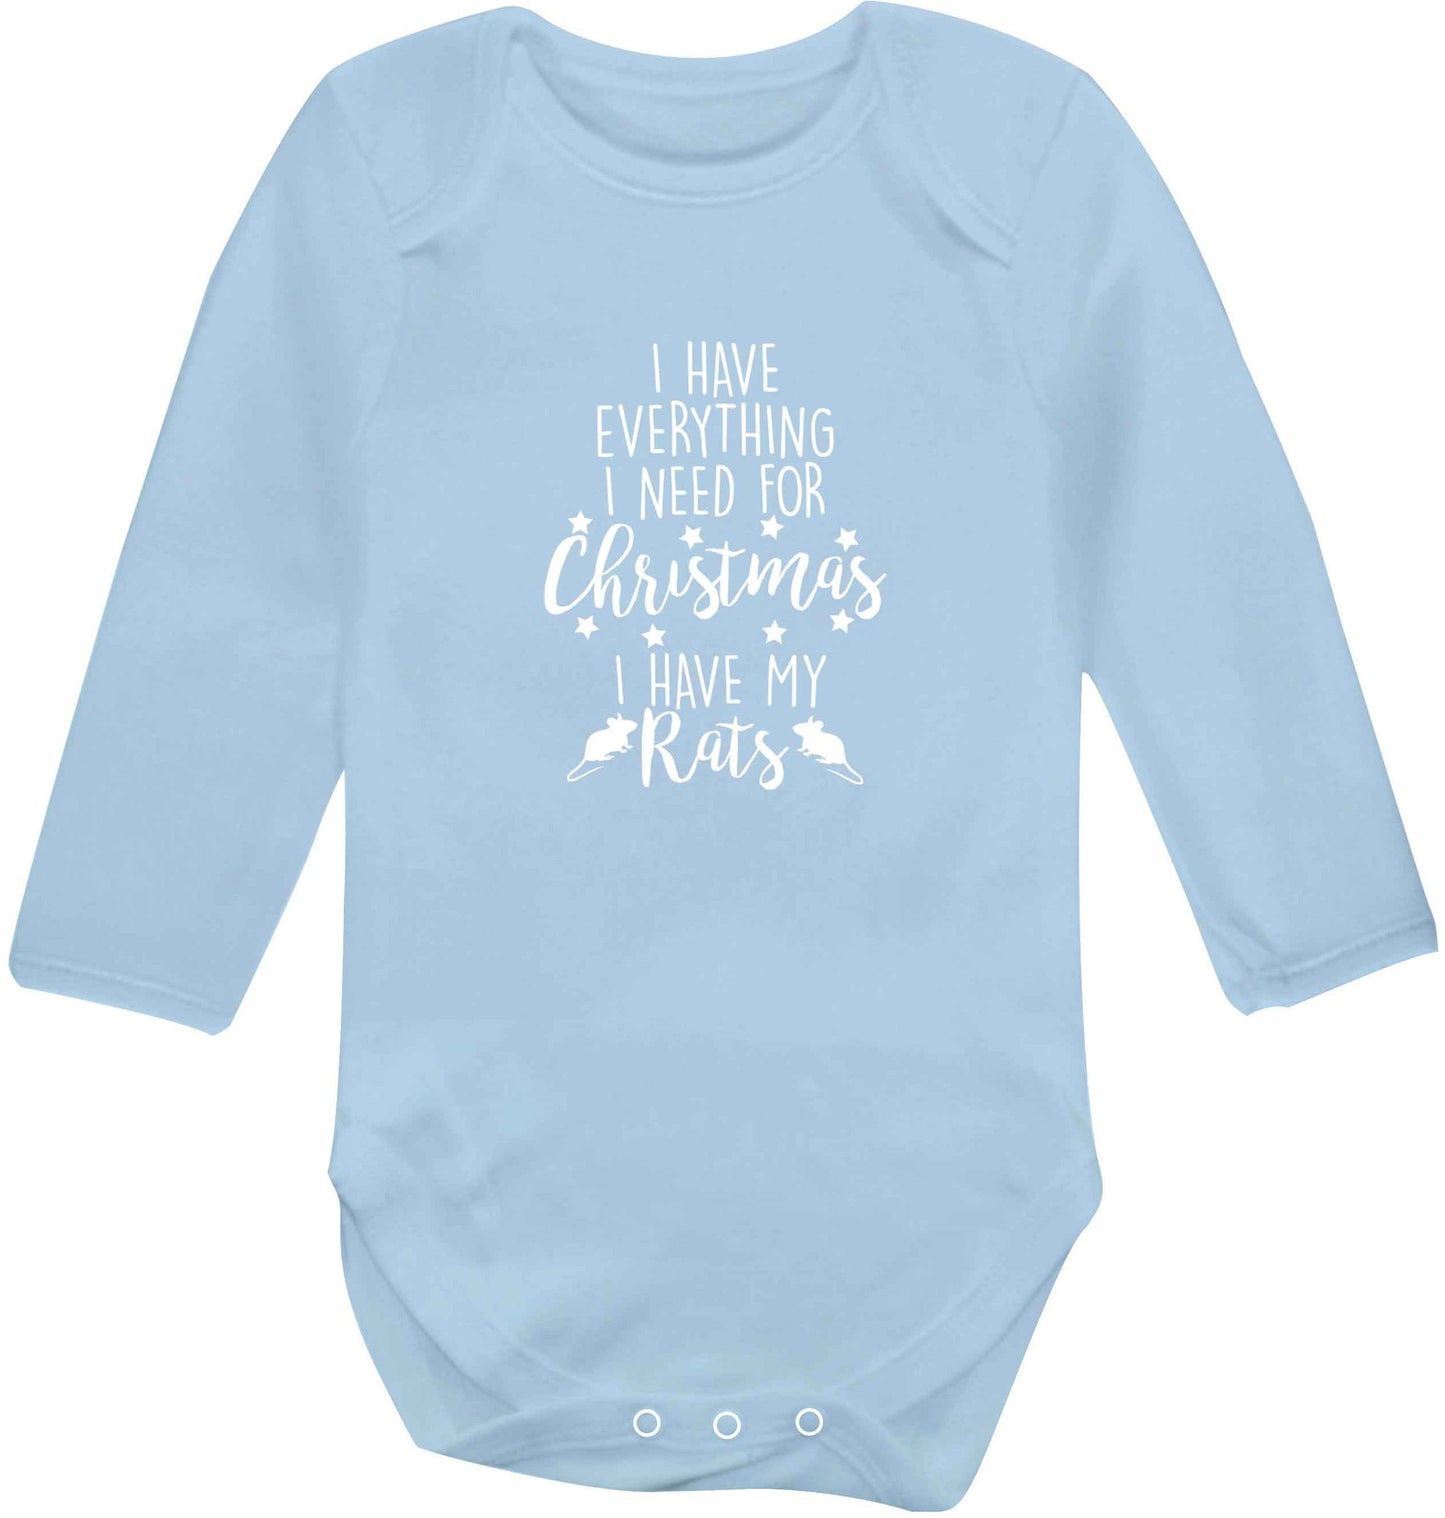 I have everything I need for Christmas I have my rats baby vest long sleeved pale blue 6-12 months